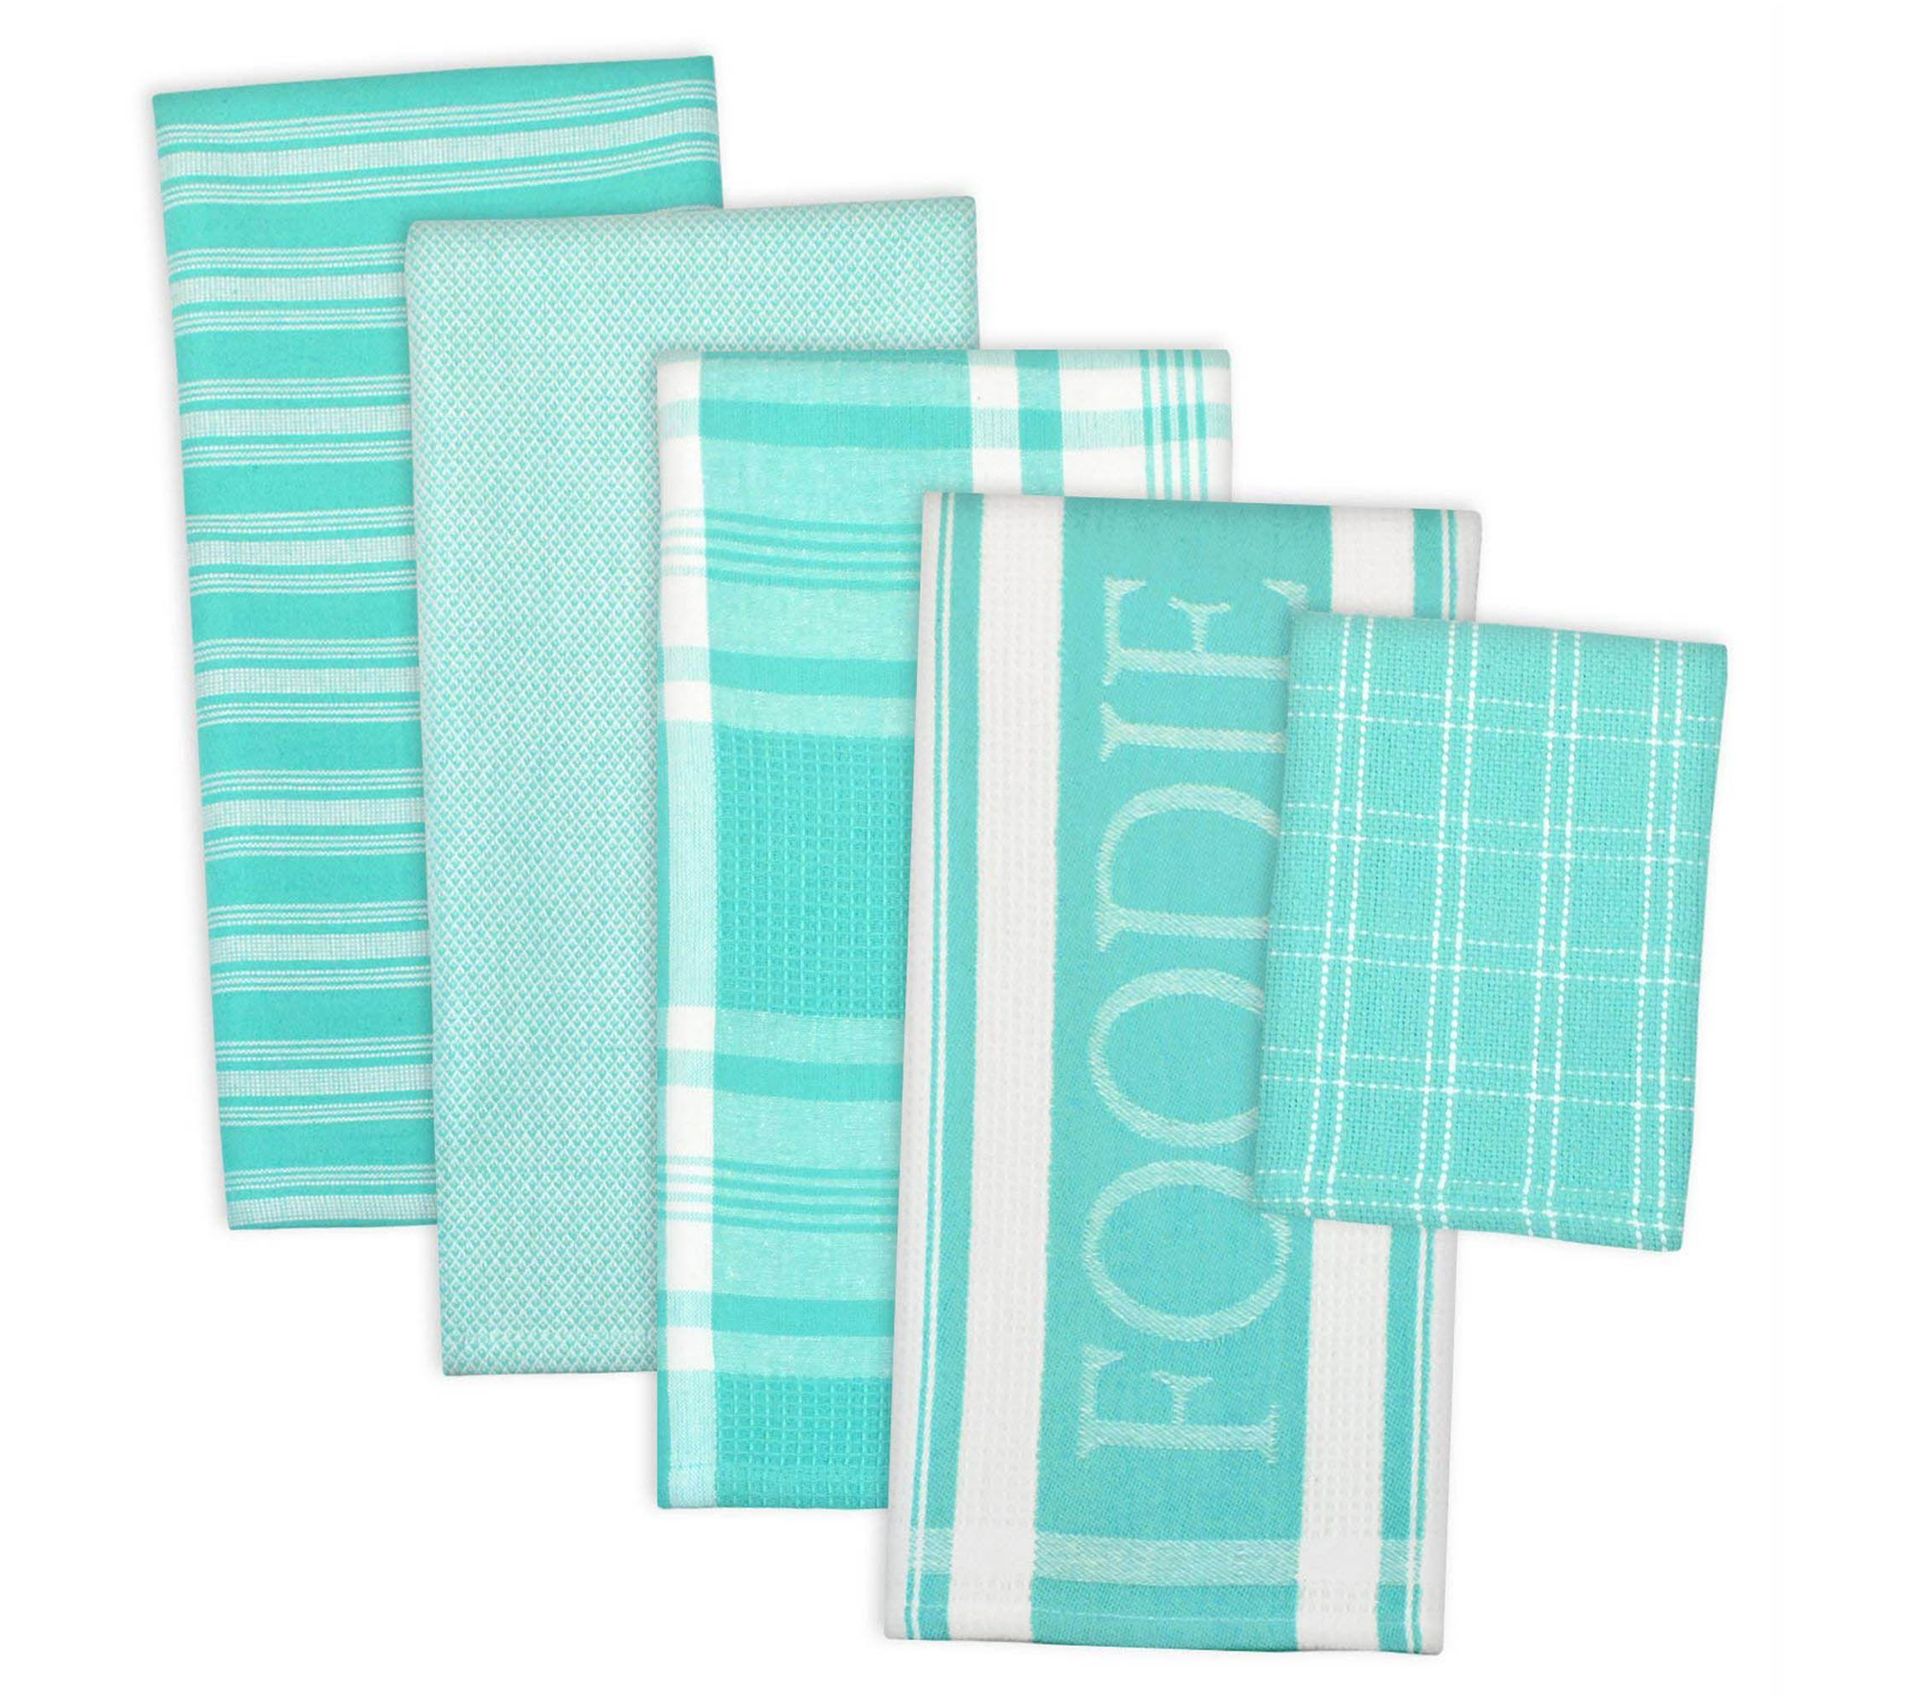 5PC Kitchen Towels Sets - Housewarming Gifts New Home, Hostess Gifts,  Christmas Kitchen Gifts for Women - Cute Decorative Dish Towels, Hand  Towels